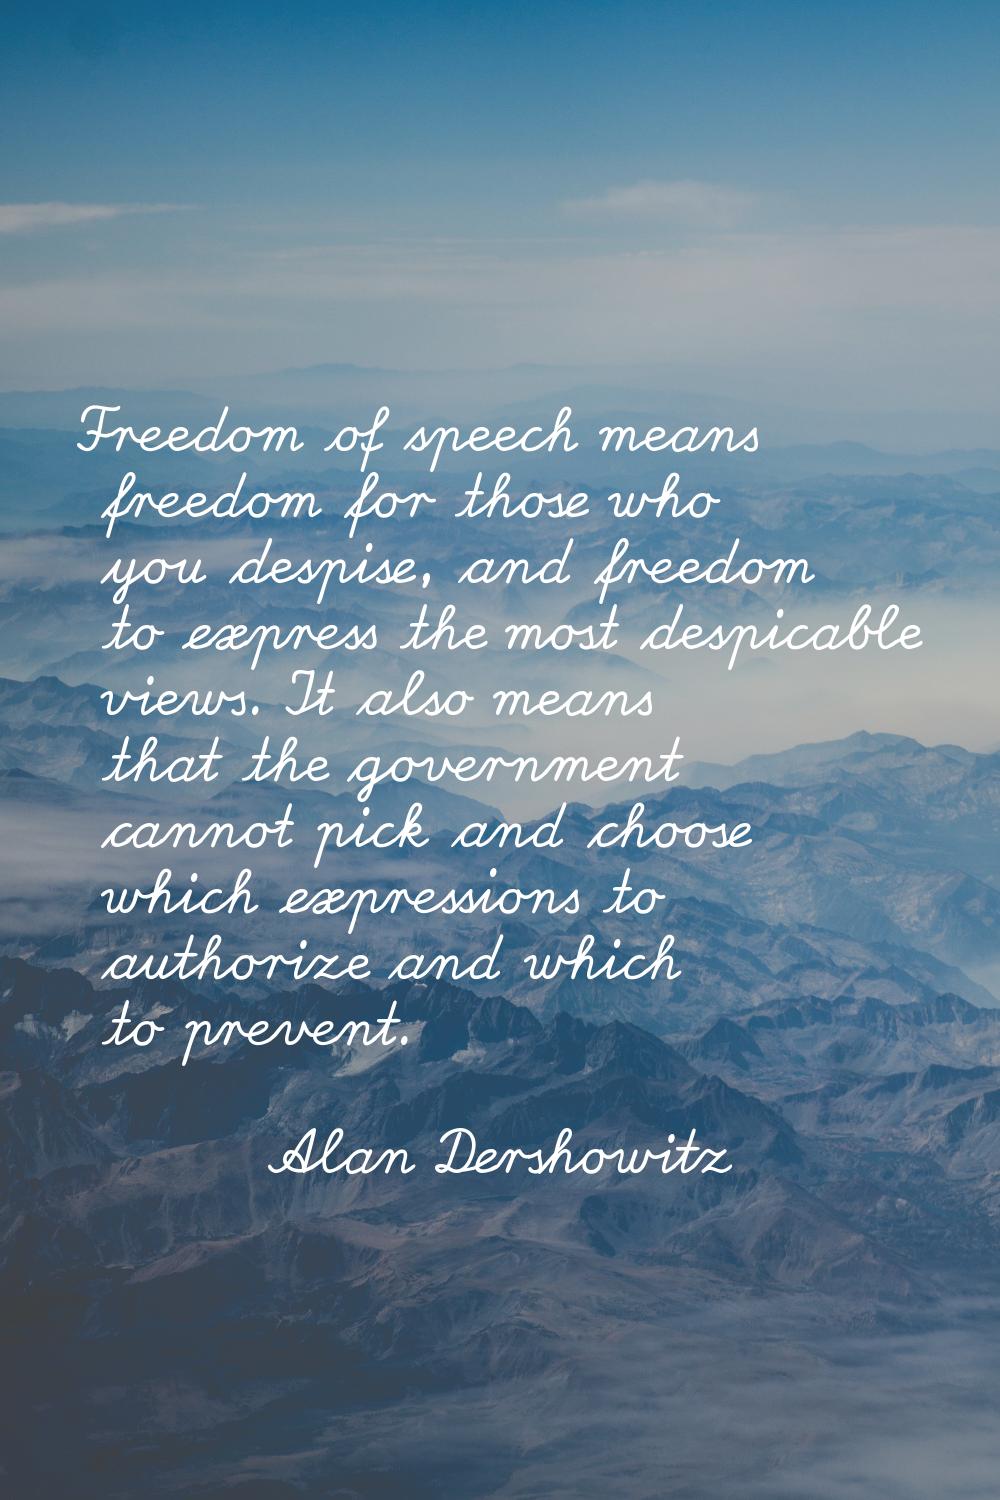 Freedom of speech means freedom for those who you despise, and freedom to express the most despicab